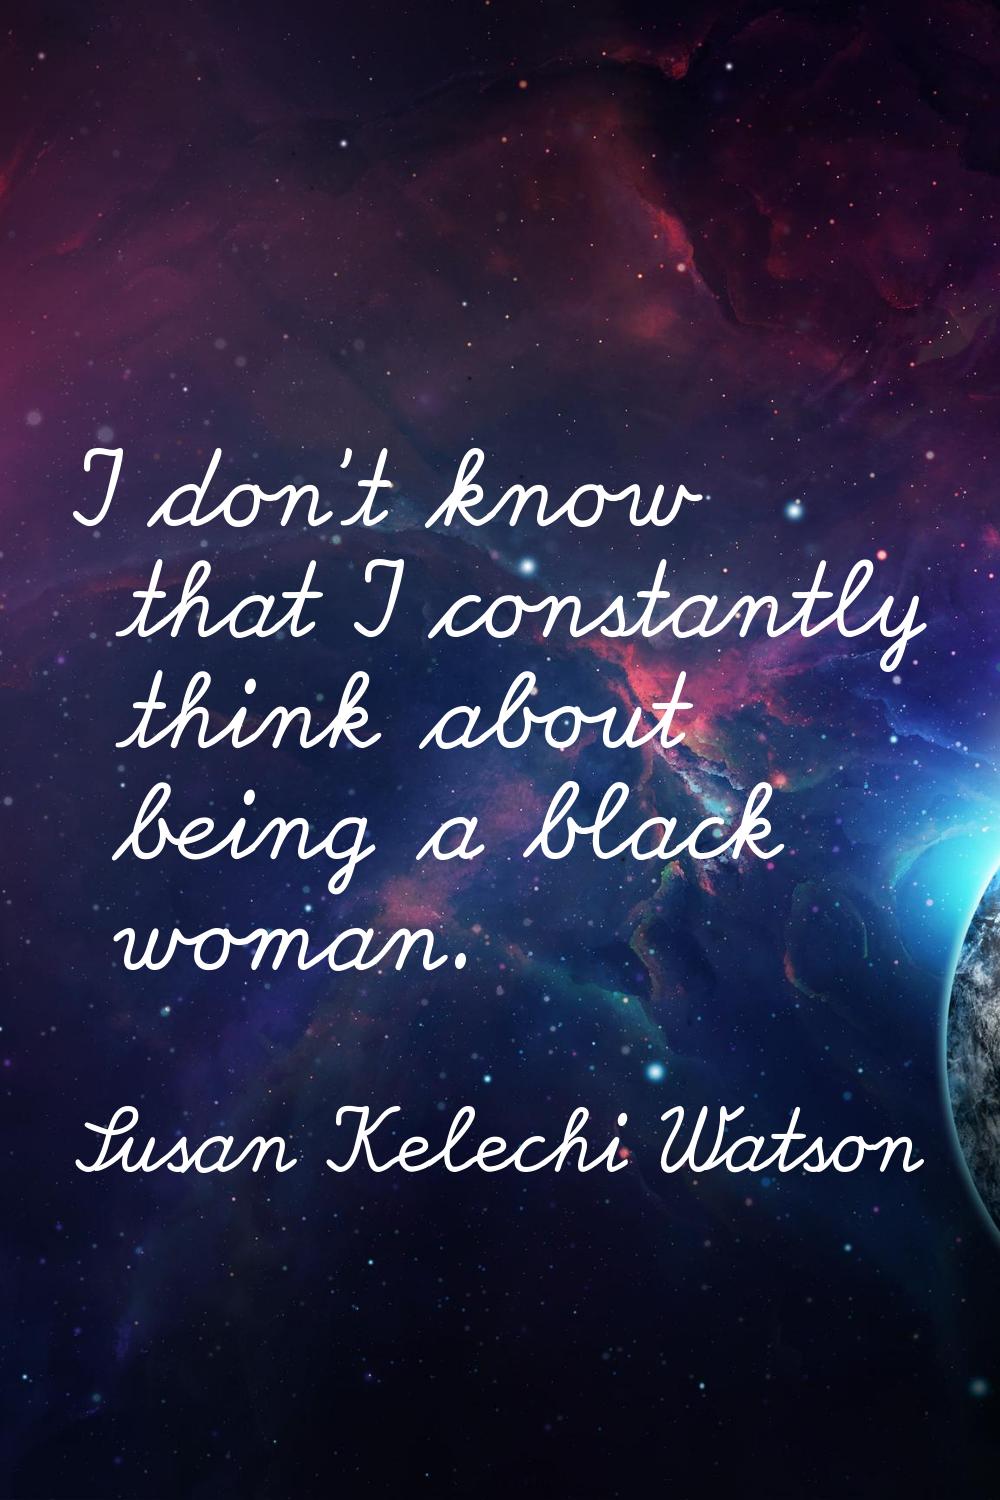 I don't know that I constantly think about being a black woman.